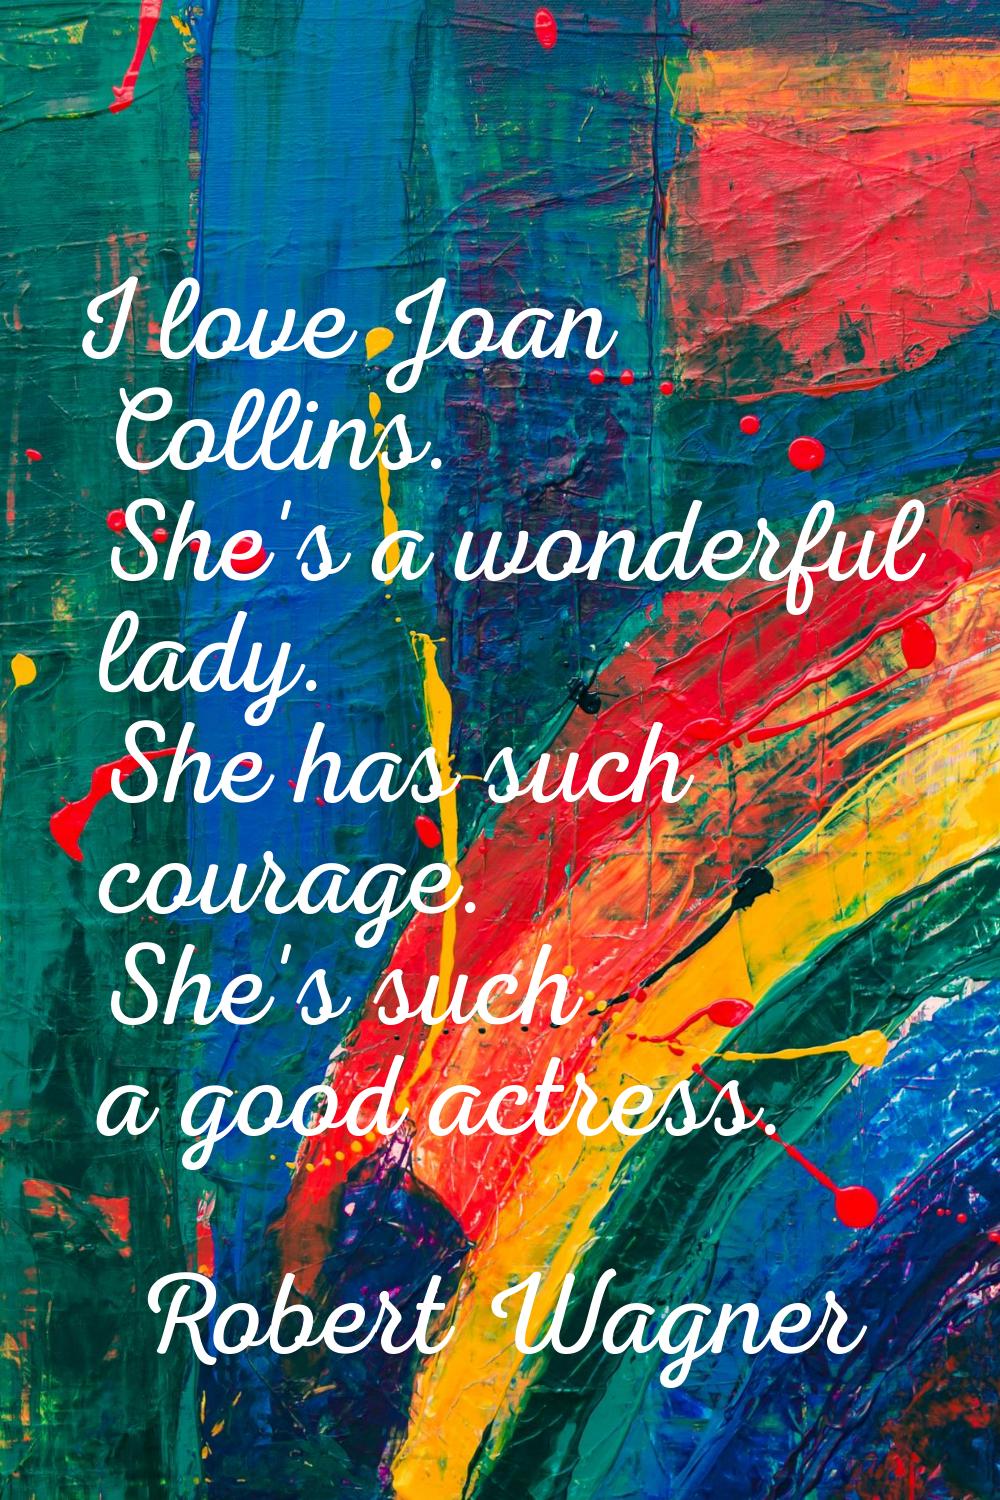 I love Joan Collins. She's a wonderful lady. She has such courage. She's such a good actress.